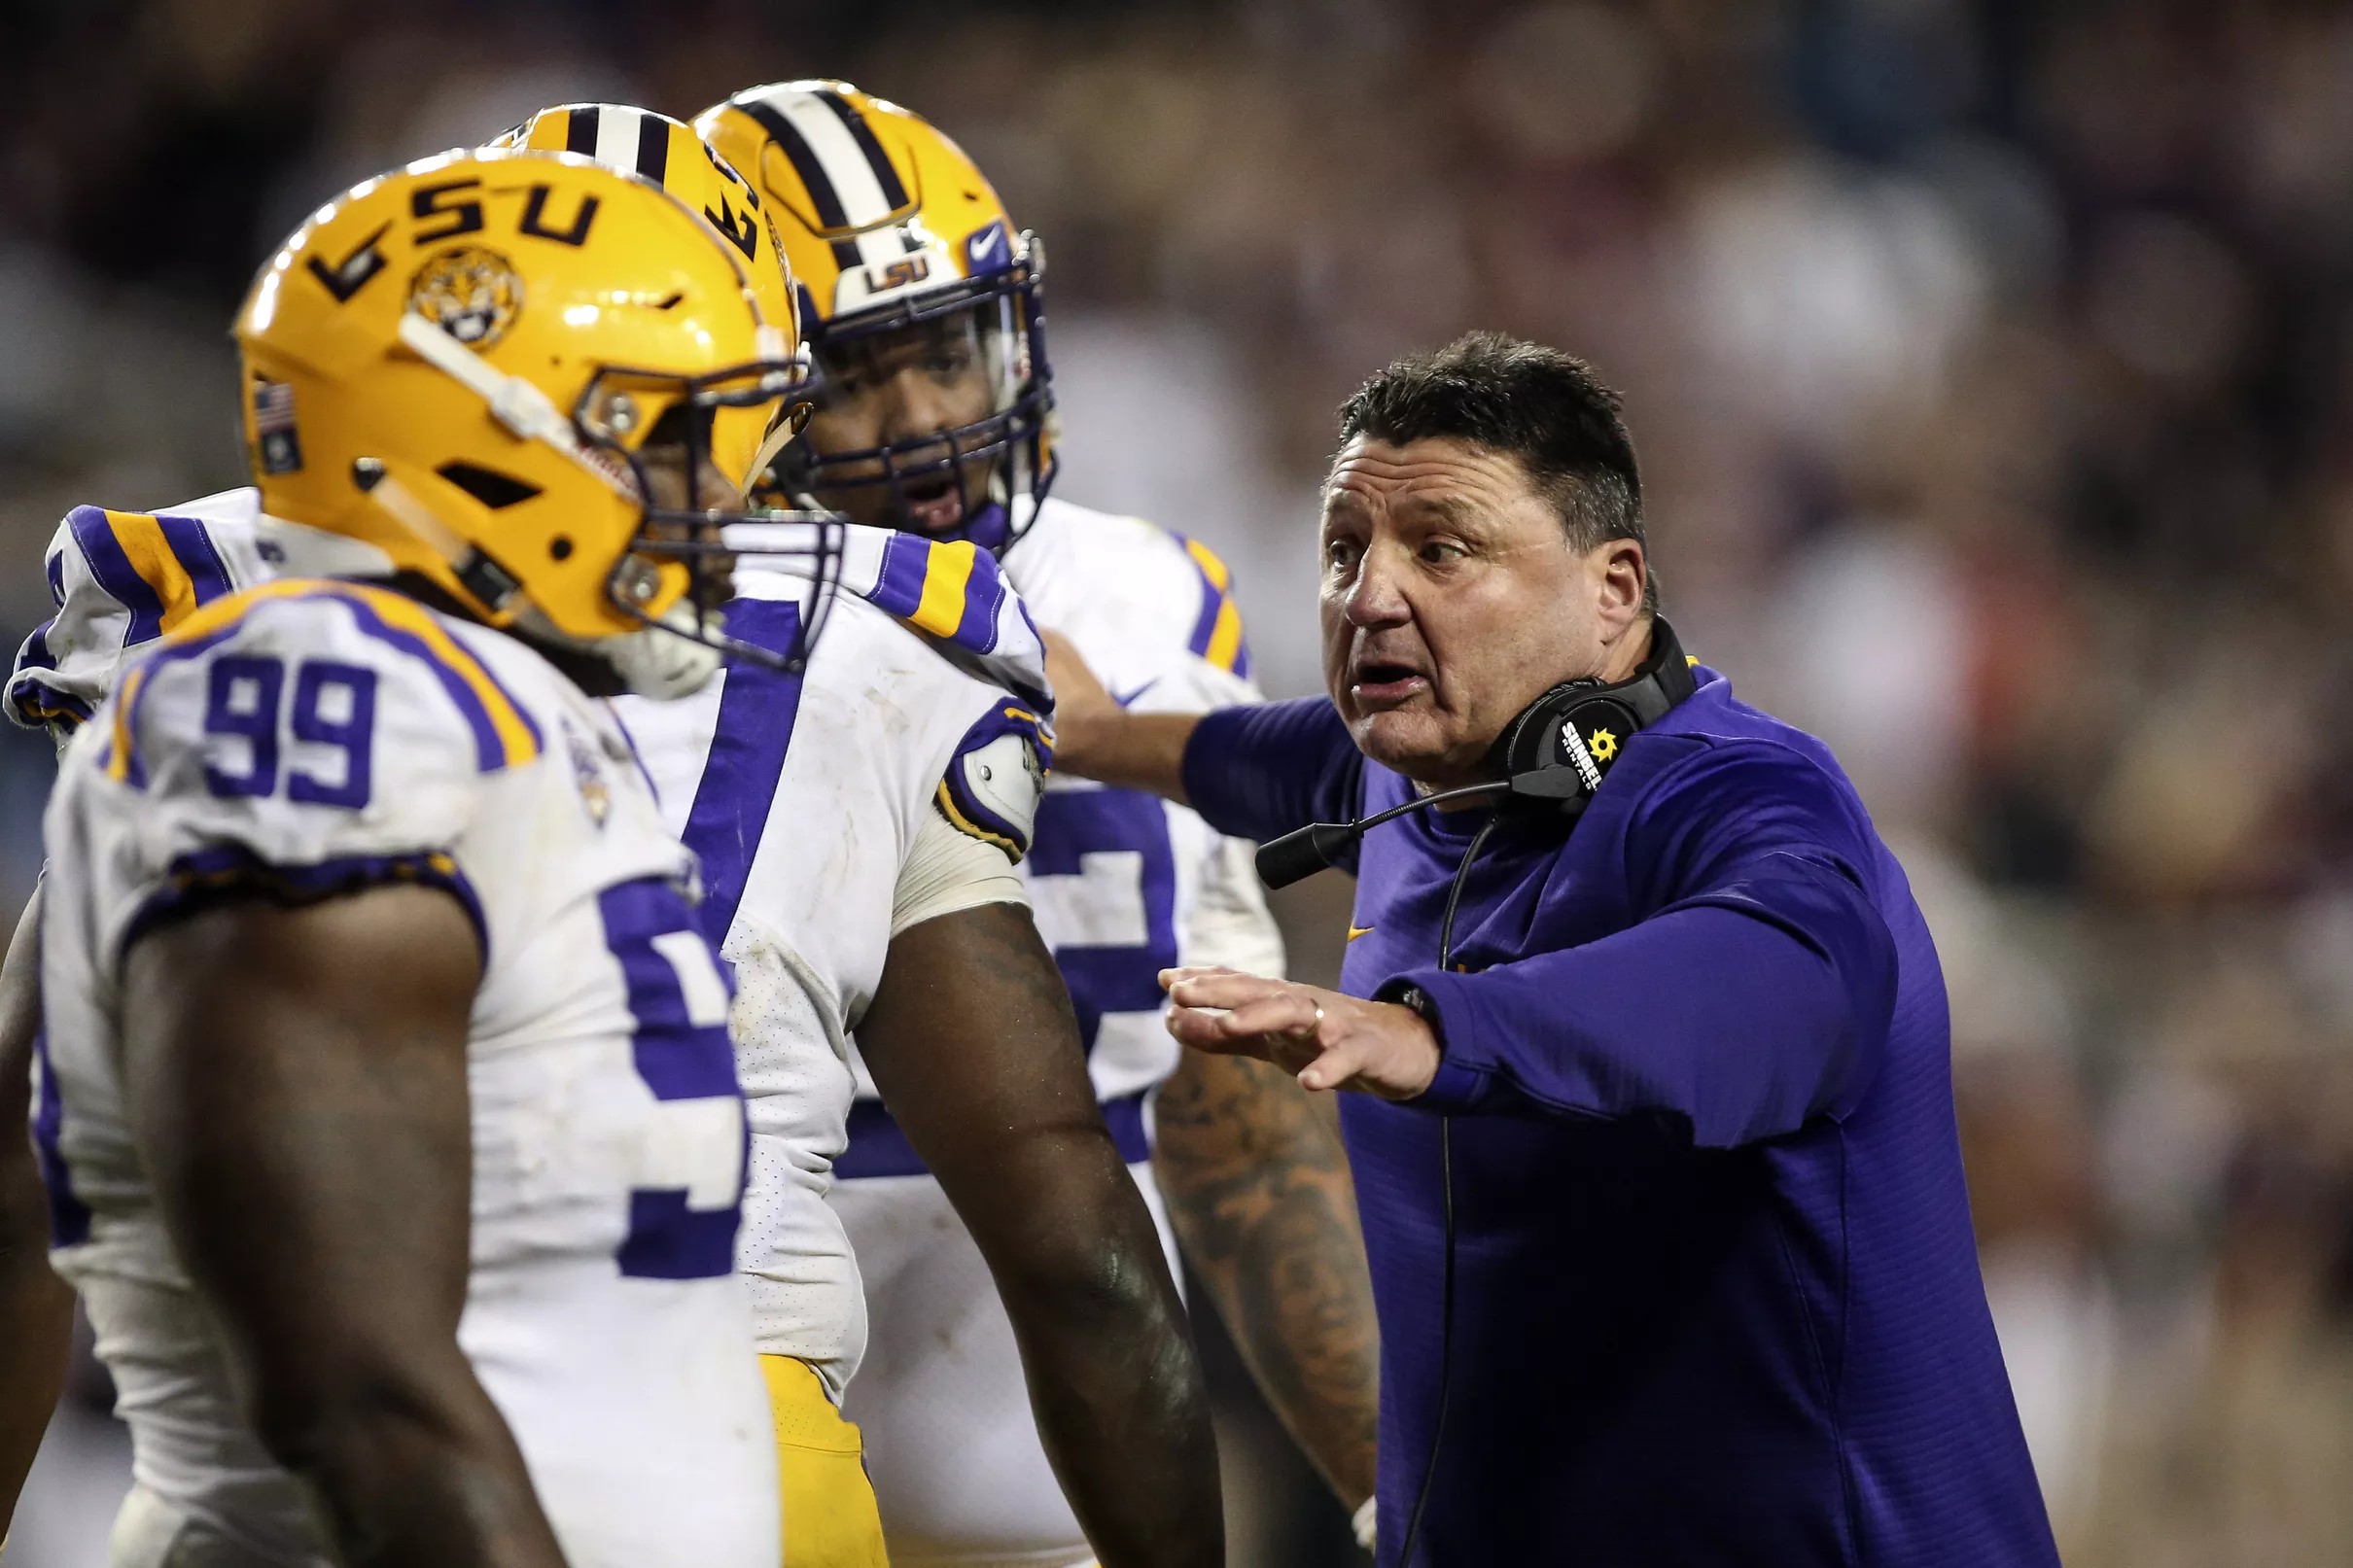 Resetting the News Cycle: What’s Next For LSU?